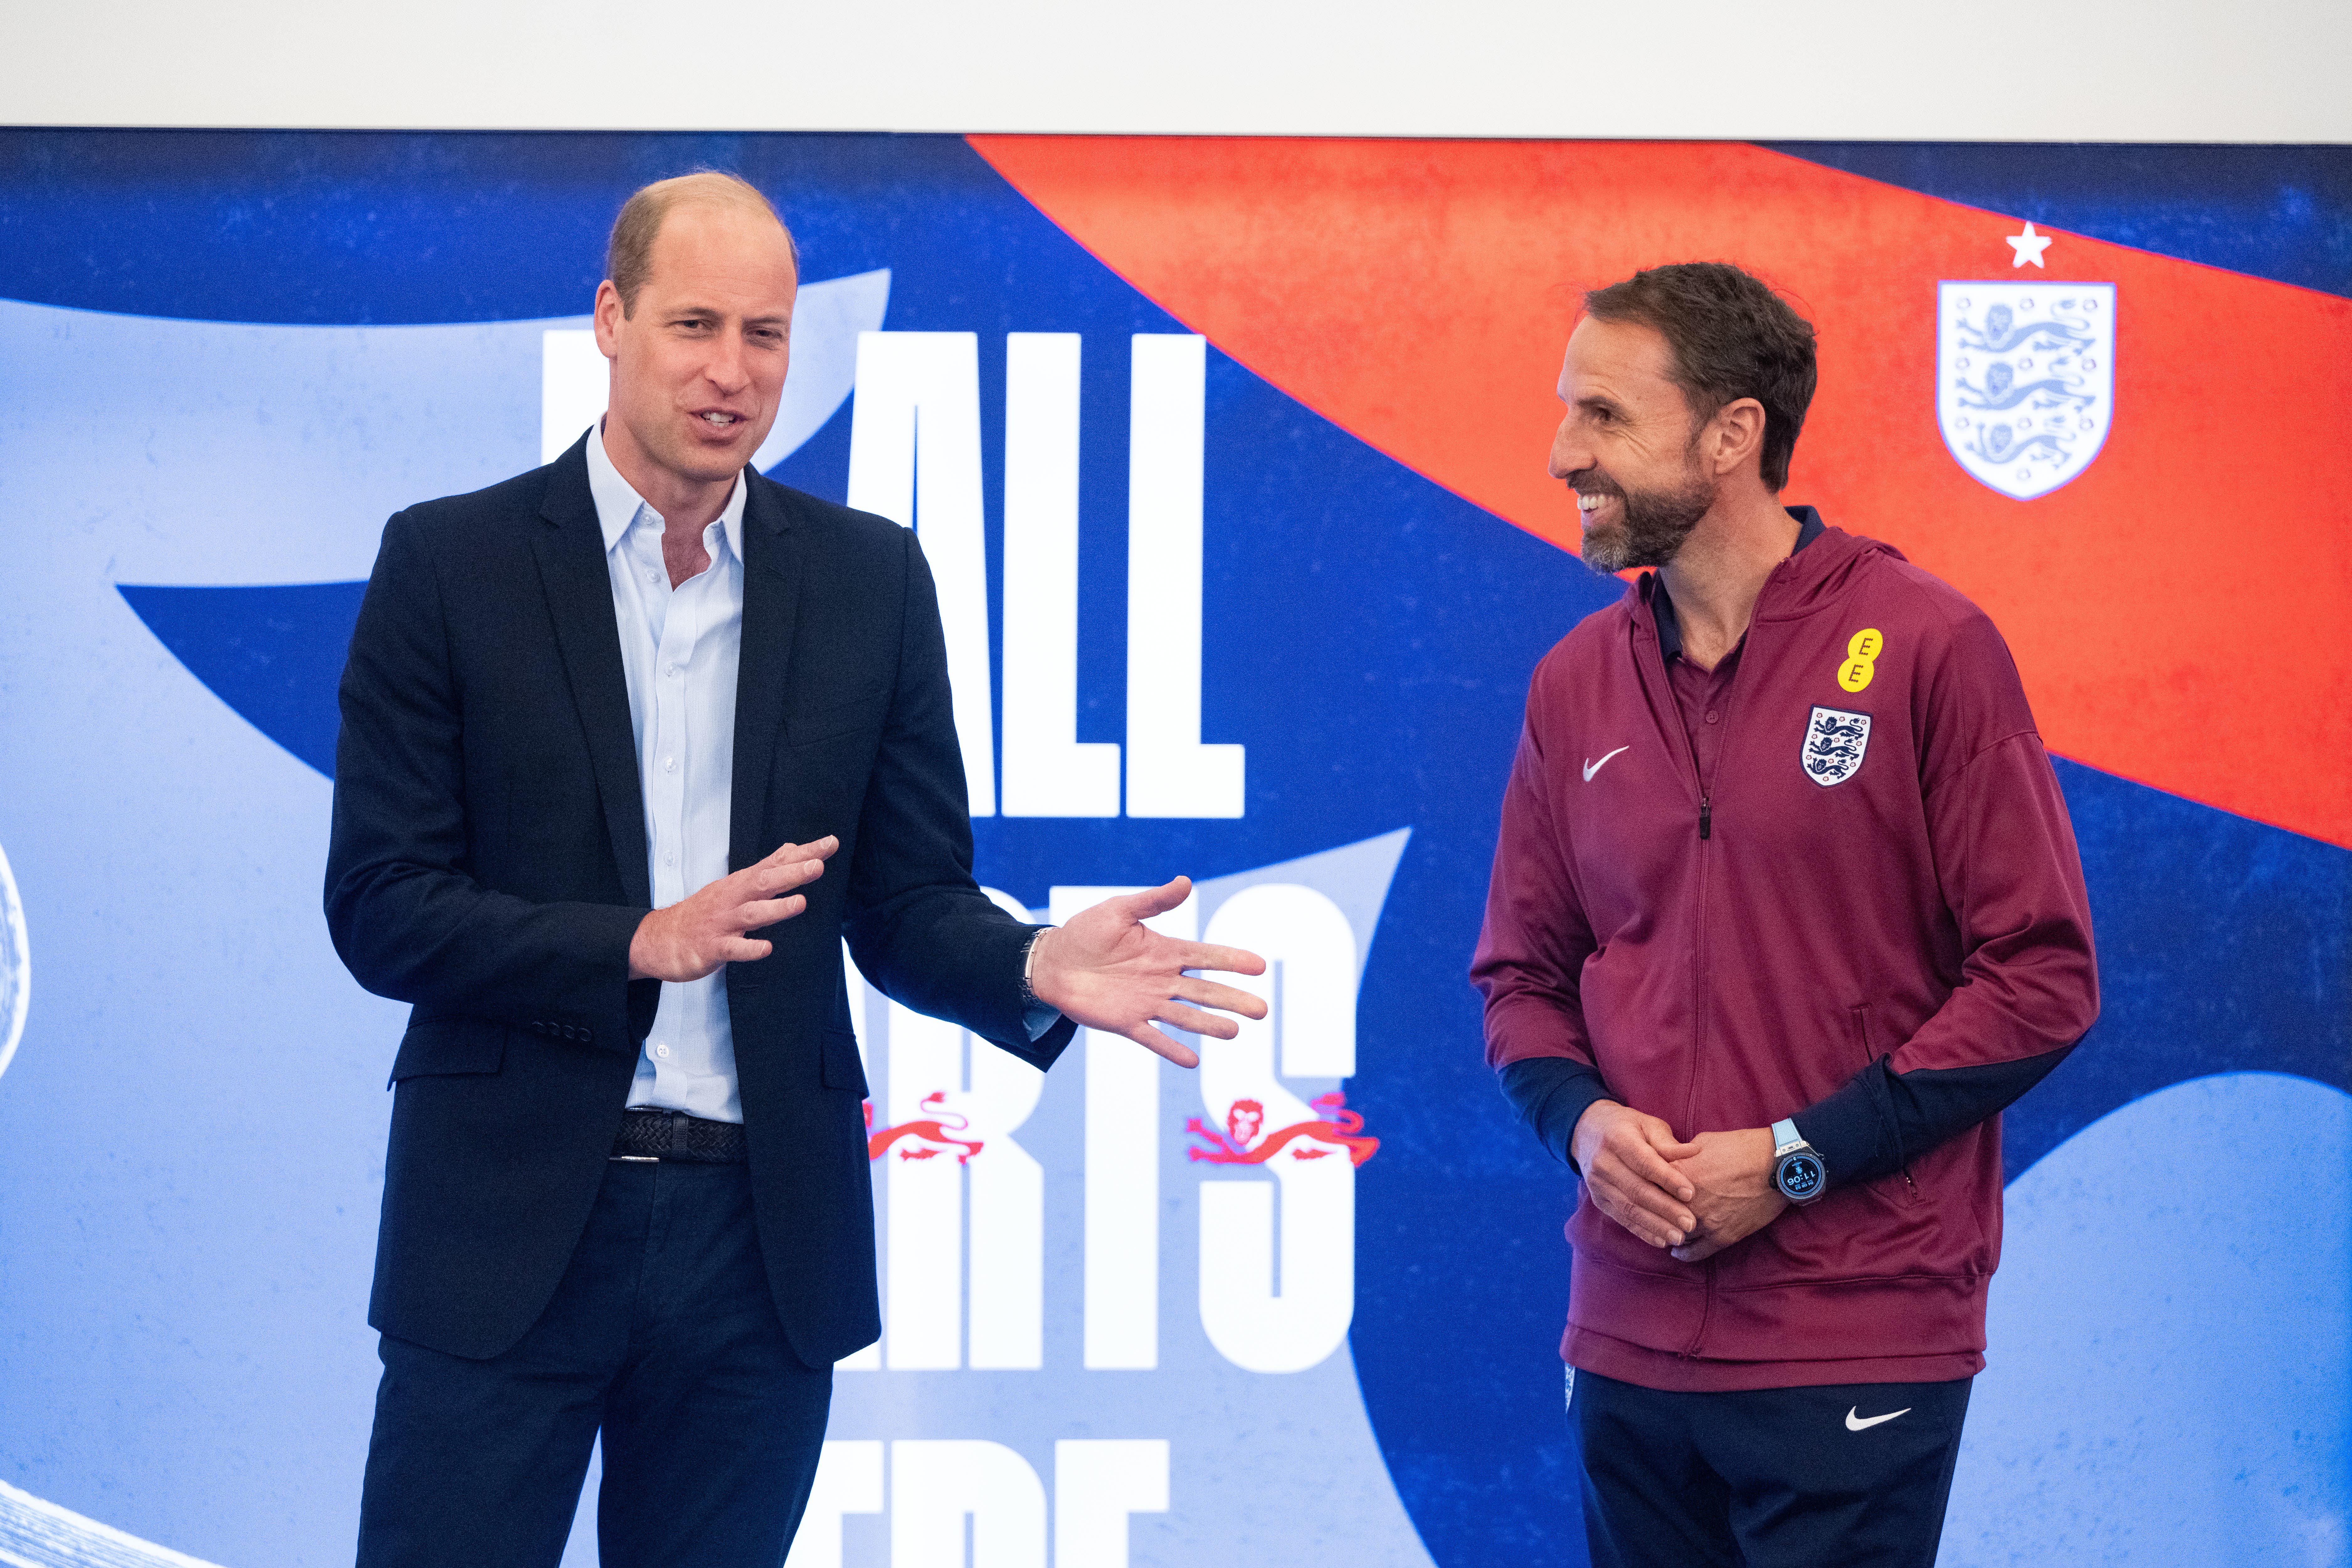 The Prince of Wales will watch the England team in their next Euro 2024 game in Germany (Paul Cooper/Daily Telegraph/PA)